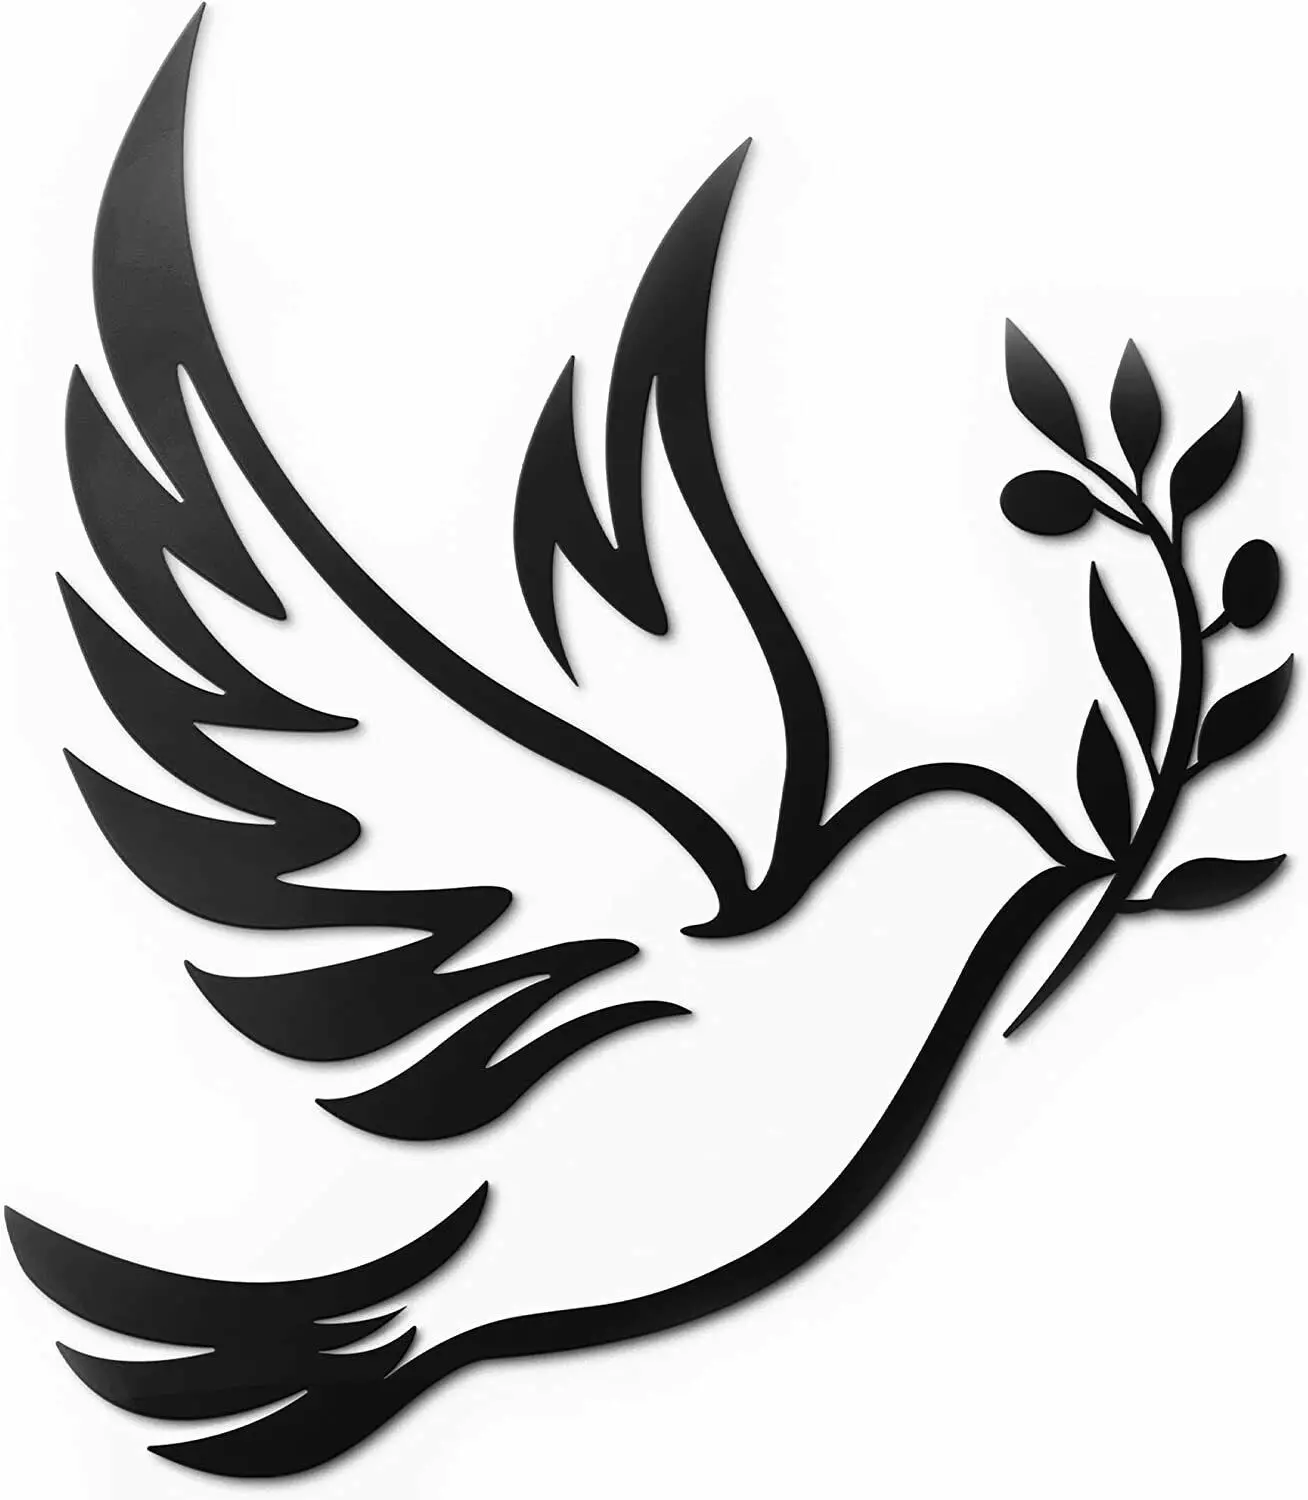 

Yinfa Dove Of Peace Olive Branch Metal Wall Art Olive Branches Peace Dove Wall Decor TY2255, Black